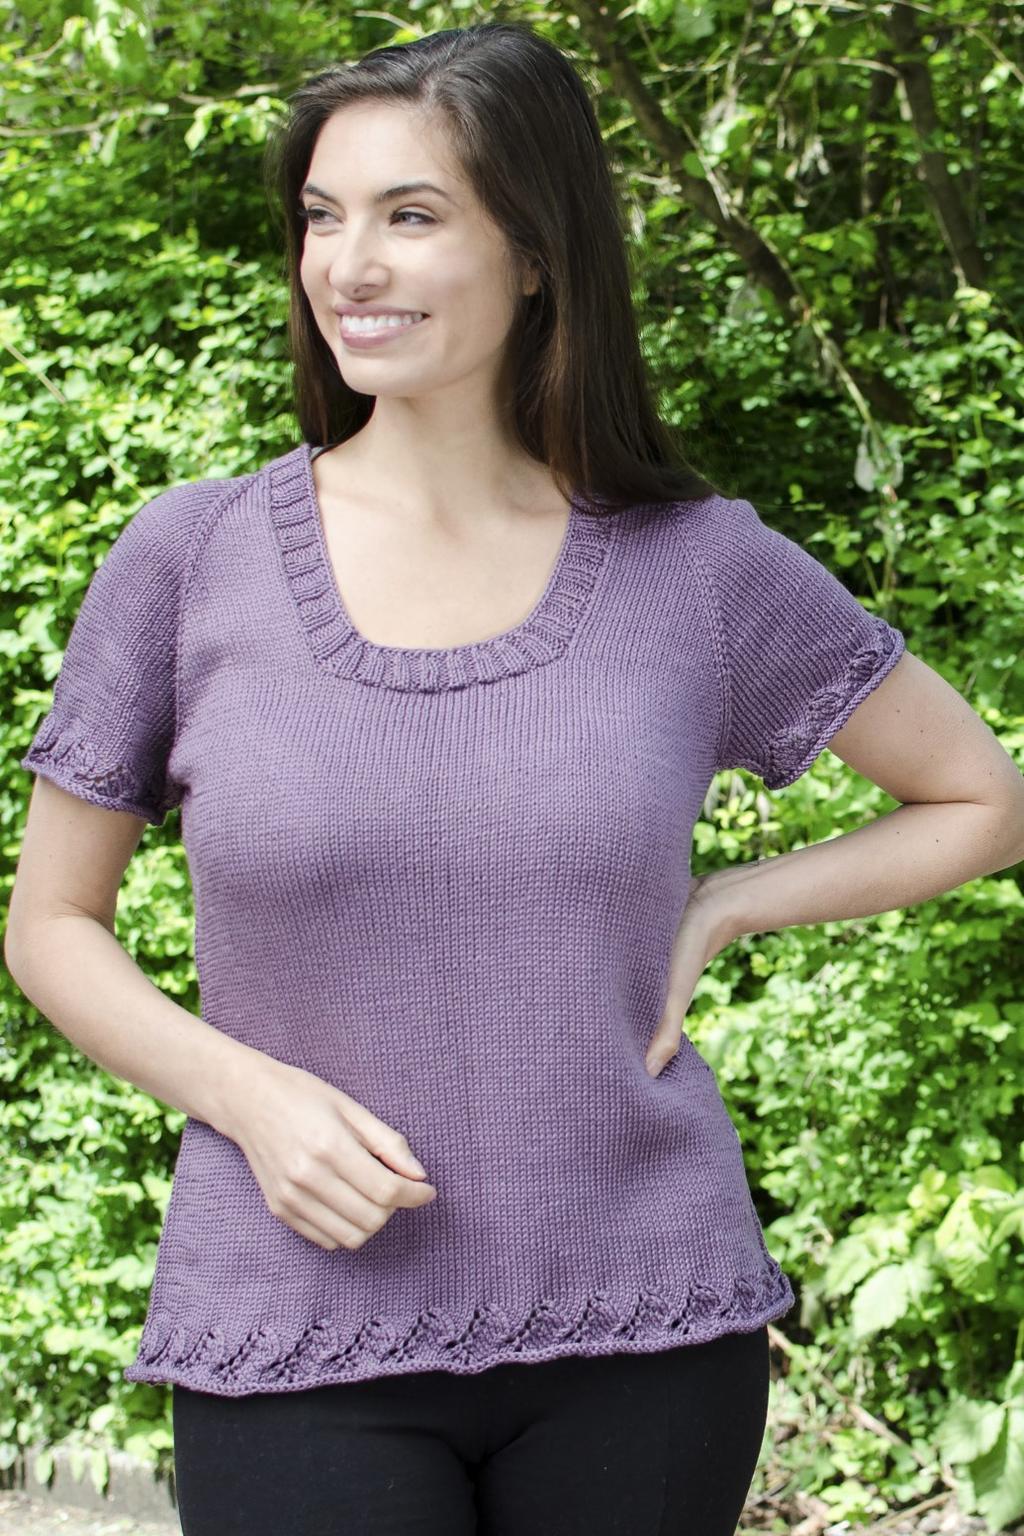 Ultra Pima Fine Jasmine Tee Designed By Tamara Moots Skill Level: Sizes: Materials: Gauge: 24 sts x 26 rows = 4 in Stockinette st with larger needles Easy/Intermediate XS (S, M, L, 1X, 2X, 3X) Chest: